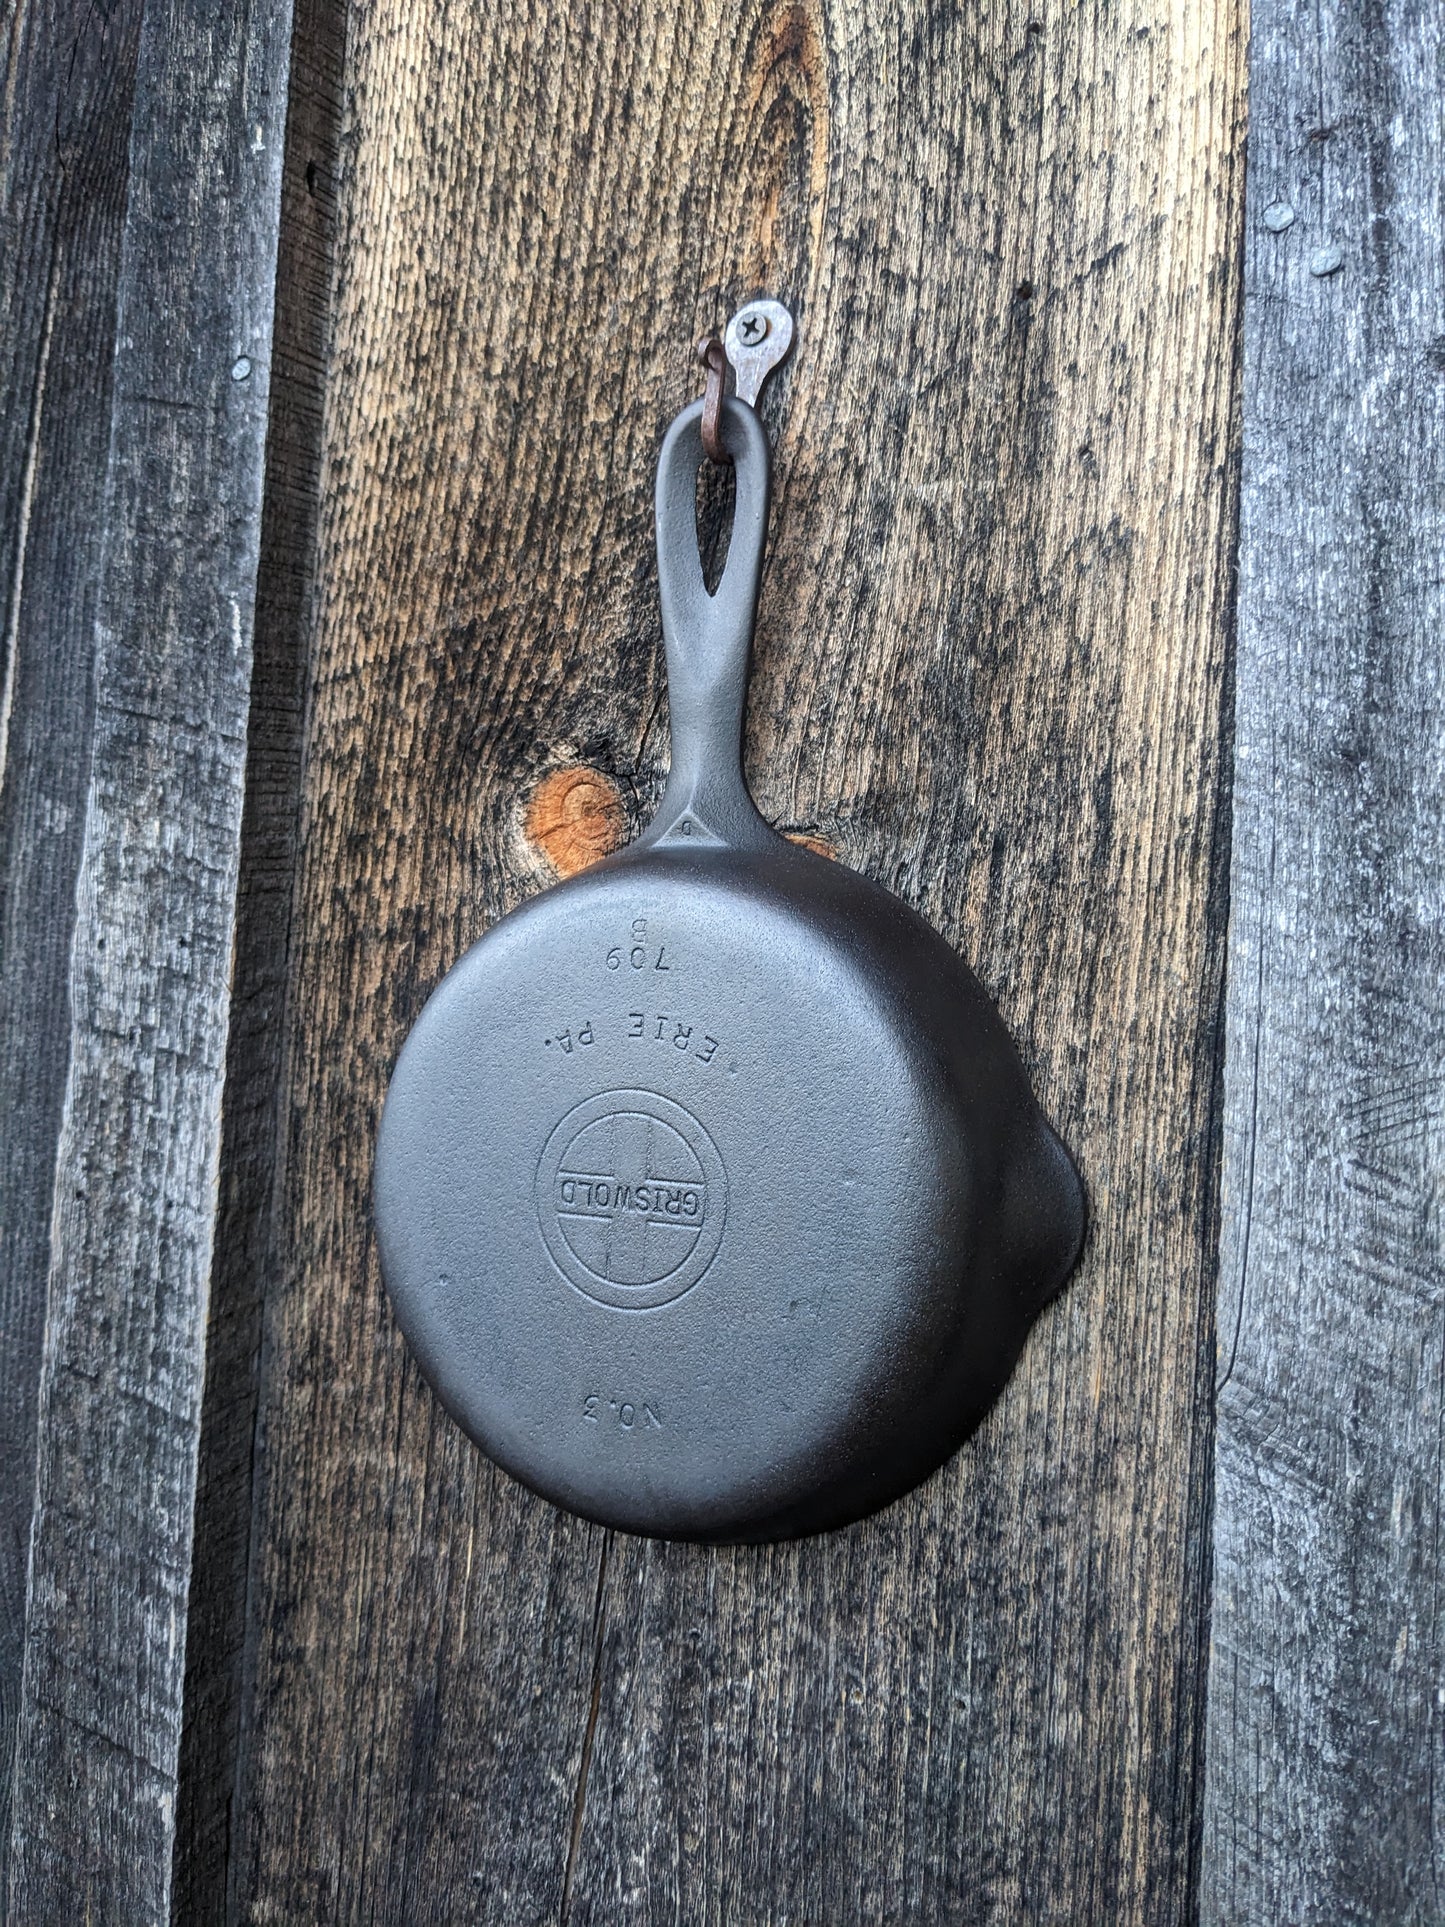 Griswold #3 Cast Iron Skillet 709 B Small Block Logo